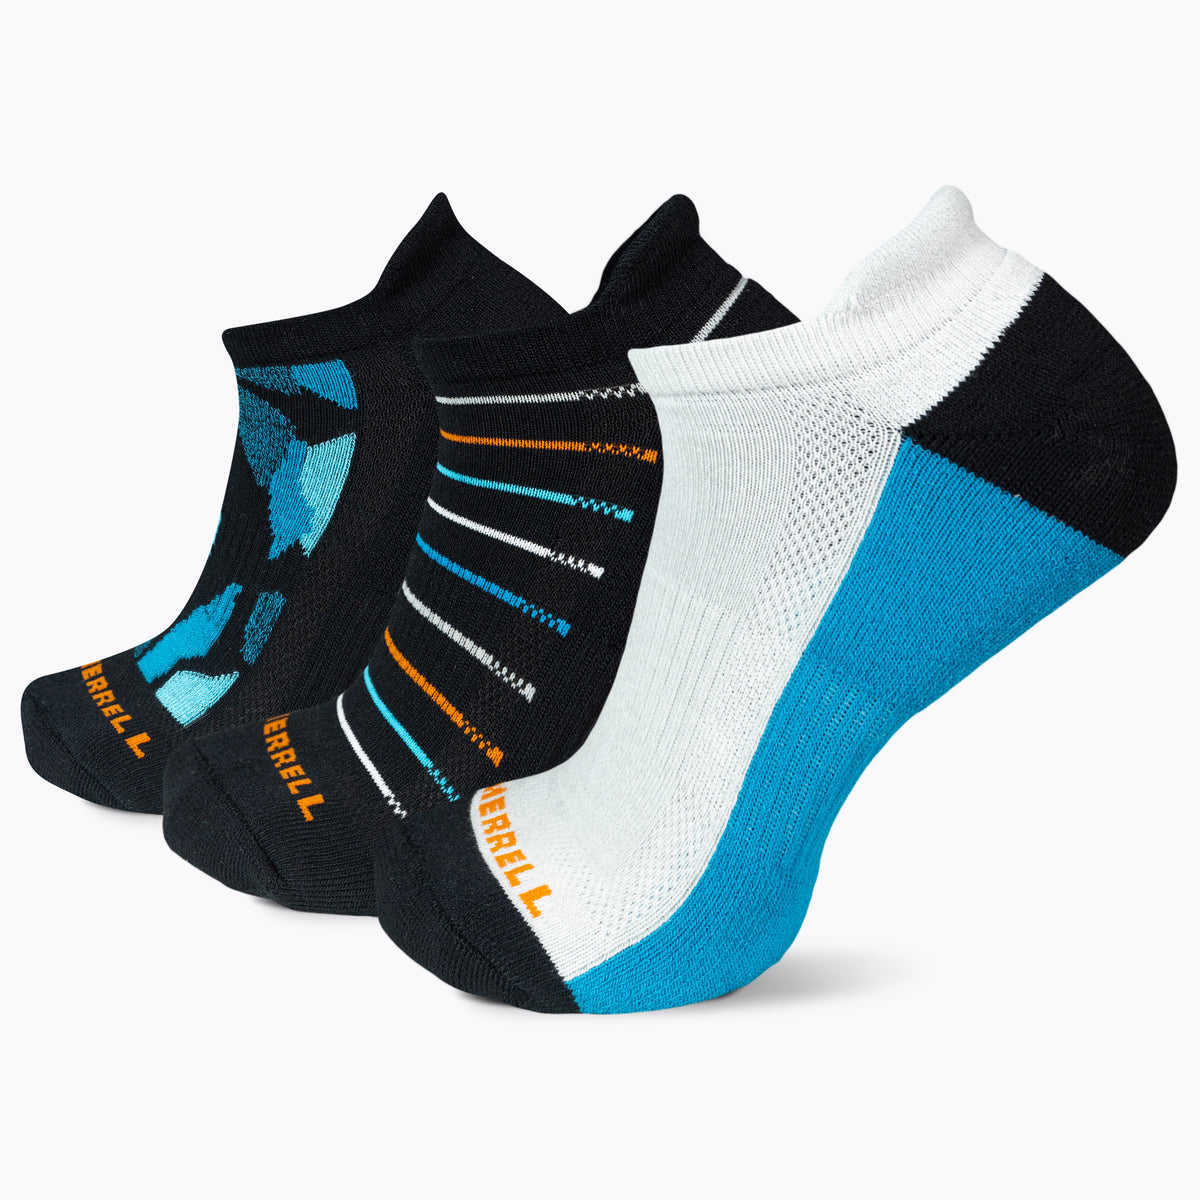 Recycled Everyday Tab 3 Pack Socks